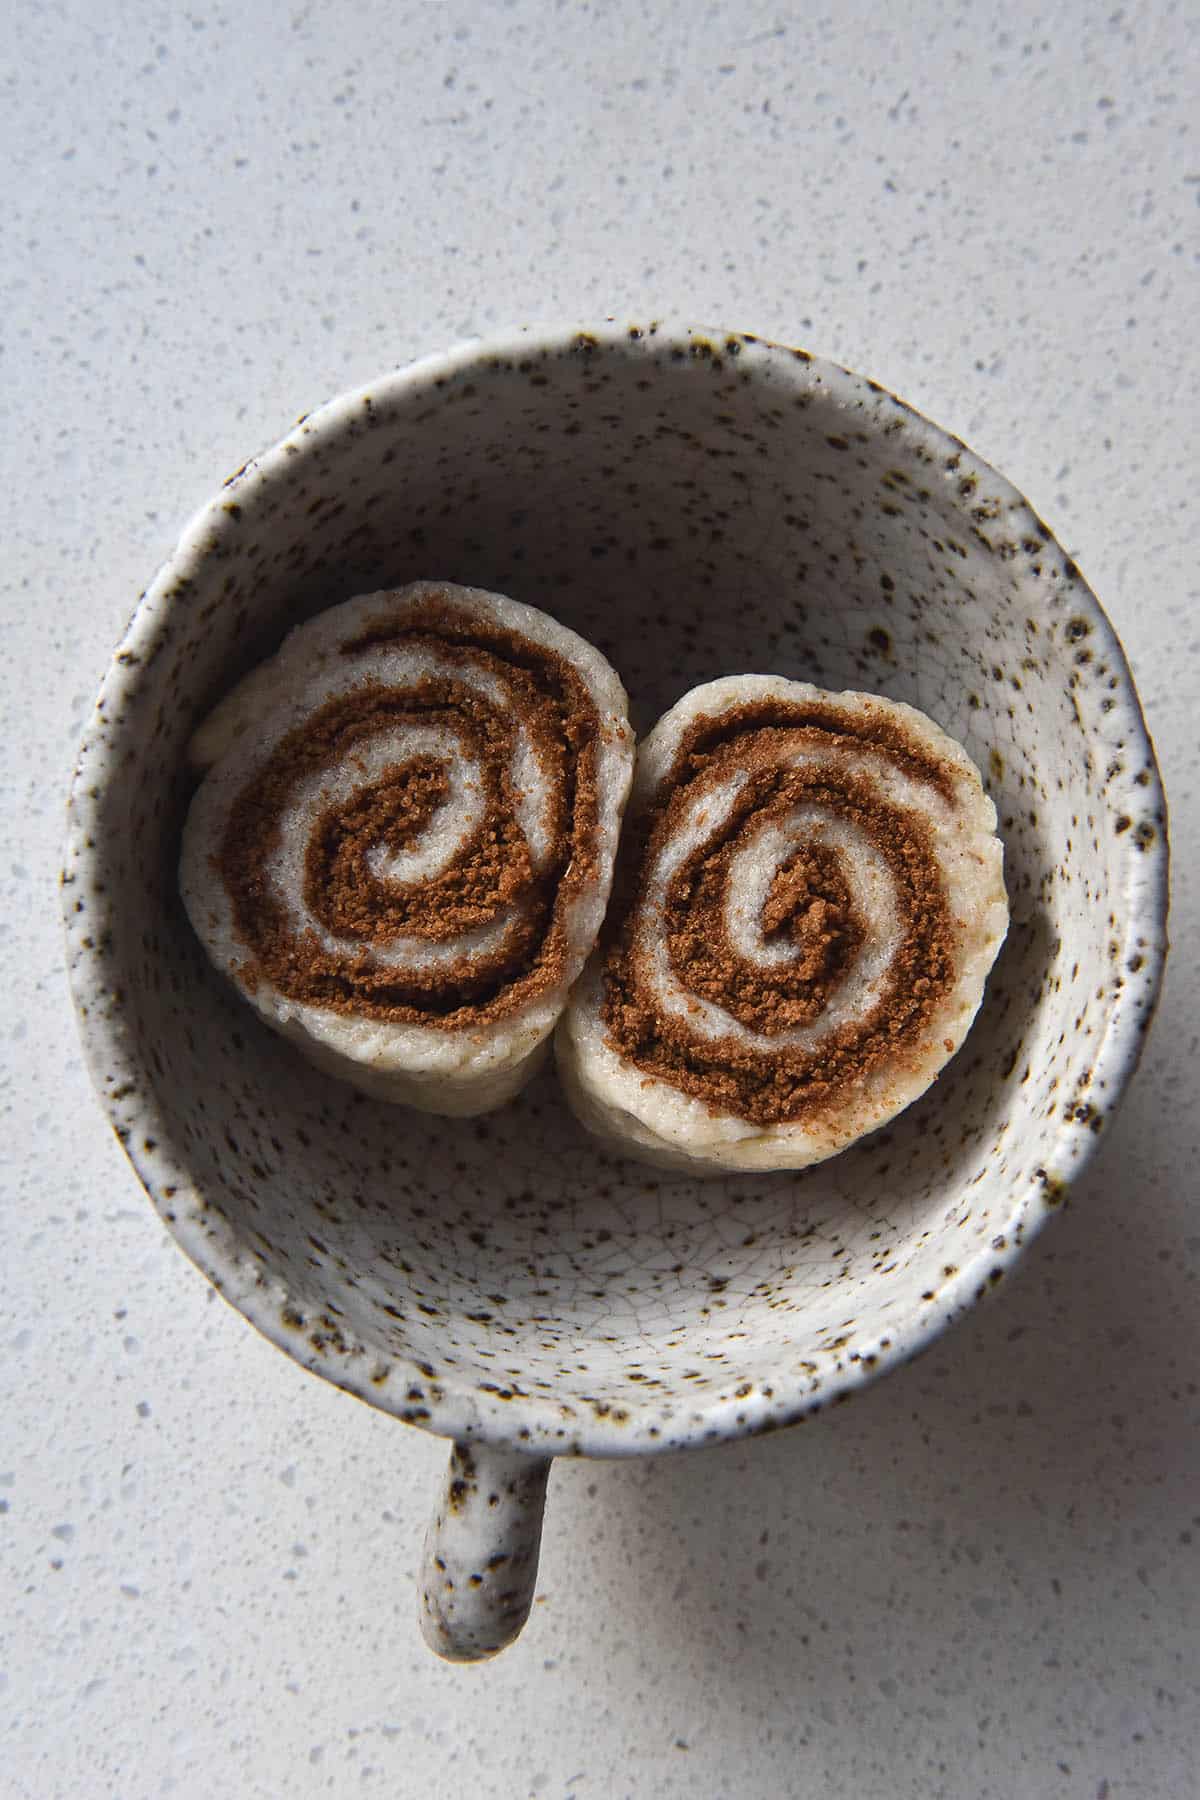 An aerial image of an uncooked gluten free, vegan microwave cinnamon scroll. The scroll has been sliced in half, and the two parts sit in a white ceramic speckled mug, cinnamon scroll side up. They are full to the brim with cinnamon sugar. The mug sits atop a white kitchen bench